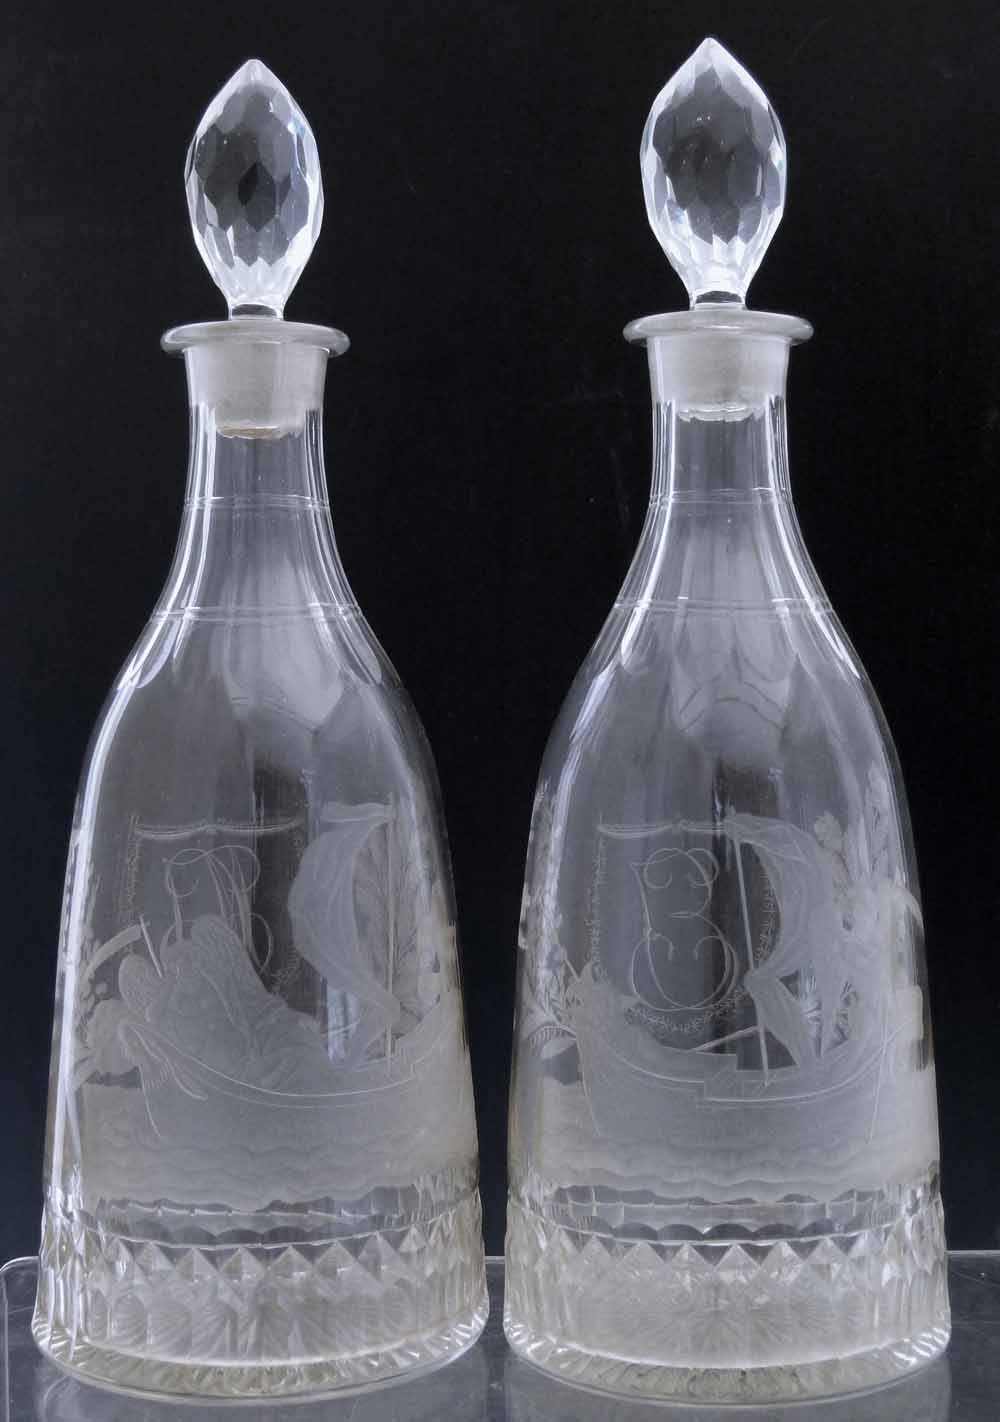 Pair of mallet shaped decanters, early 19th century, engraved with classical  allegorical scenes